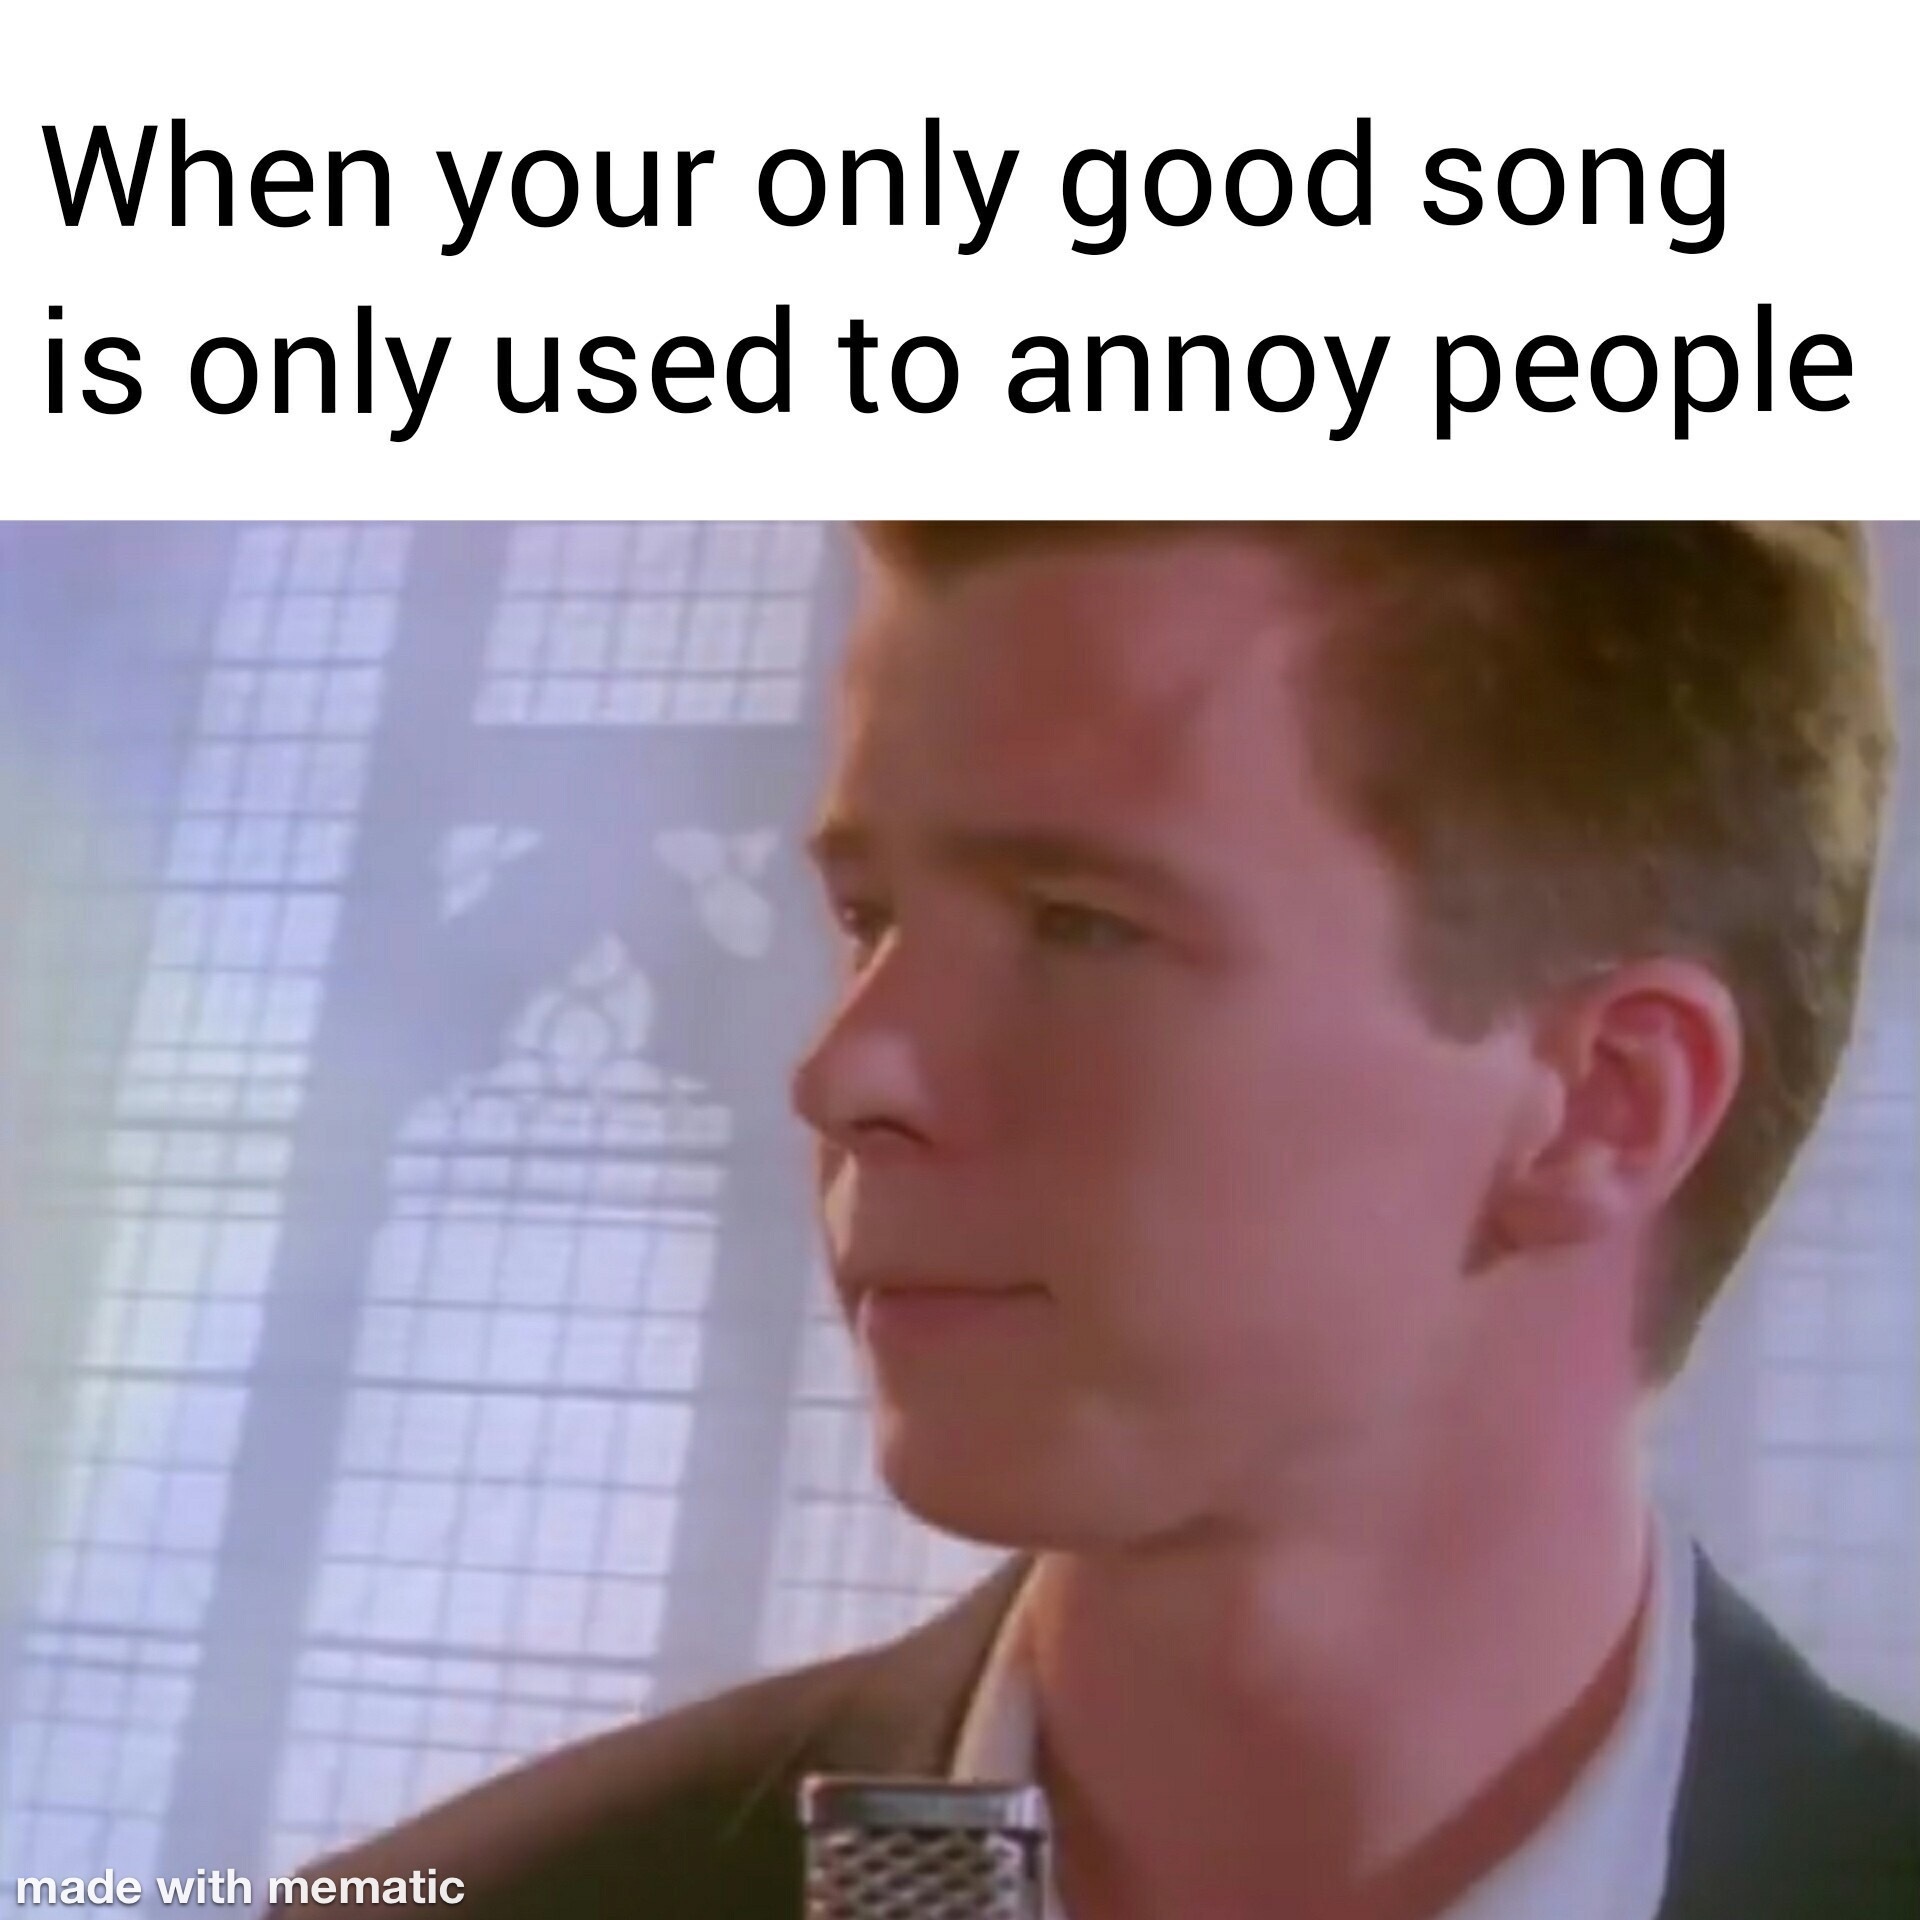 Rick-Astley-Memes-when-your-only-good-song-is-used-to-annoy-people